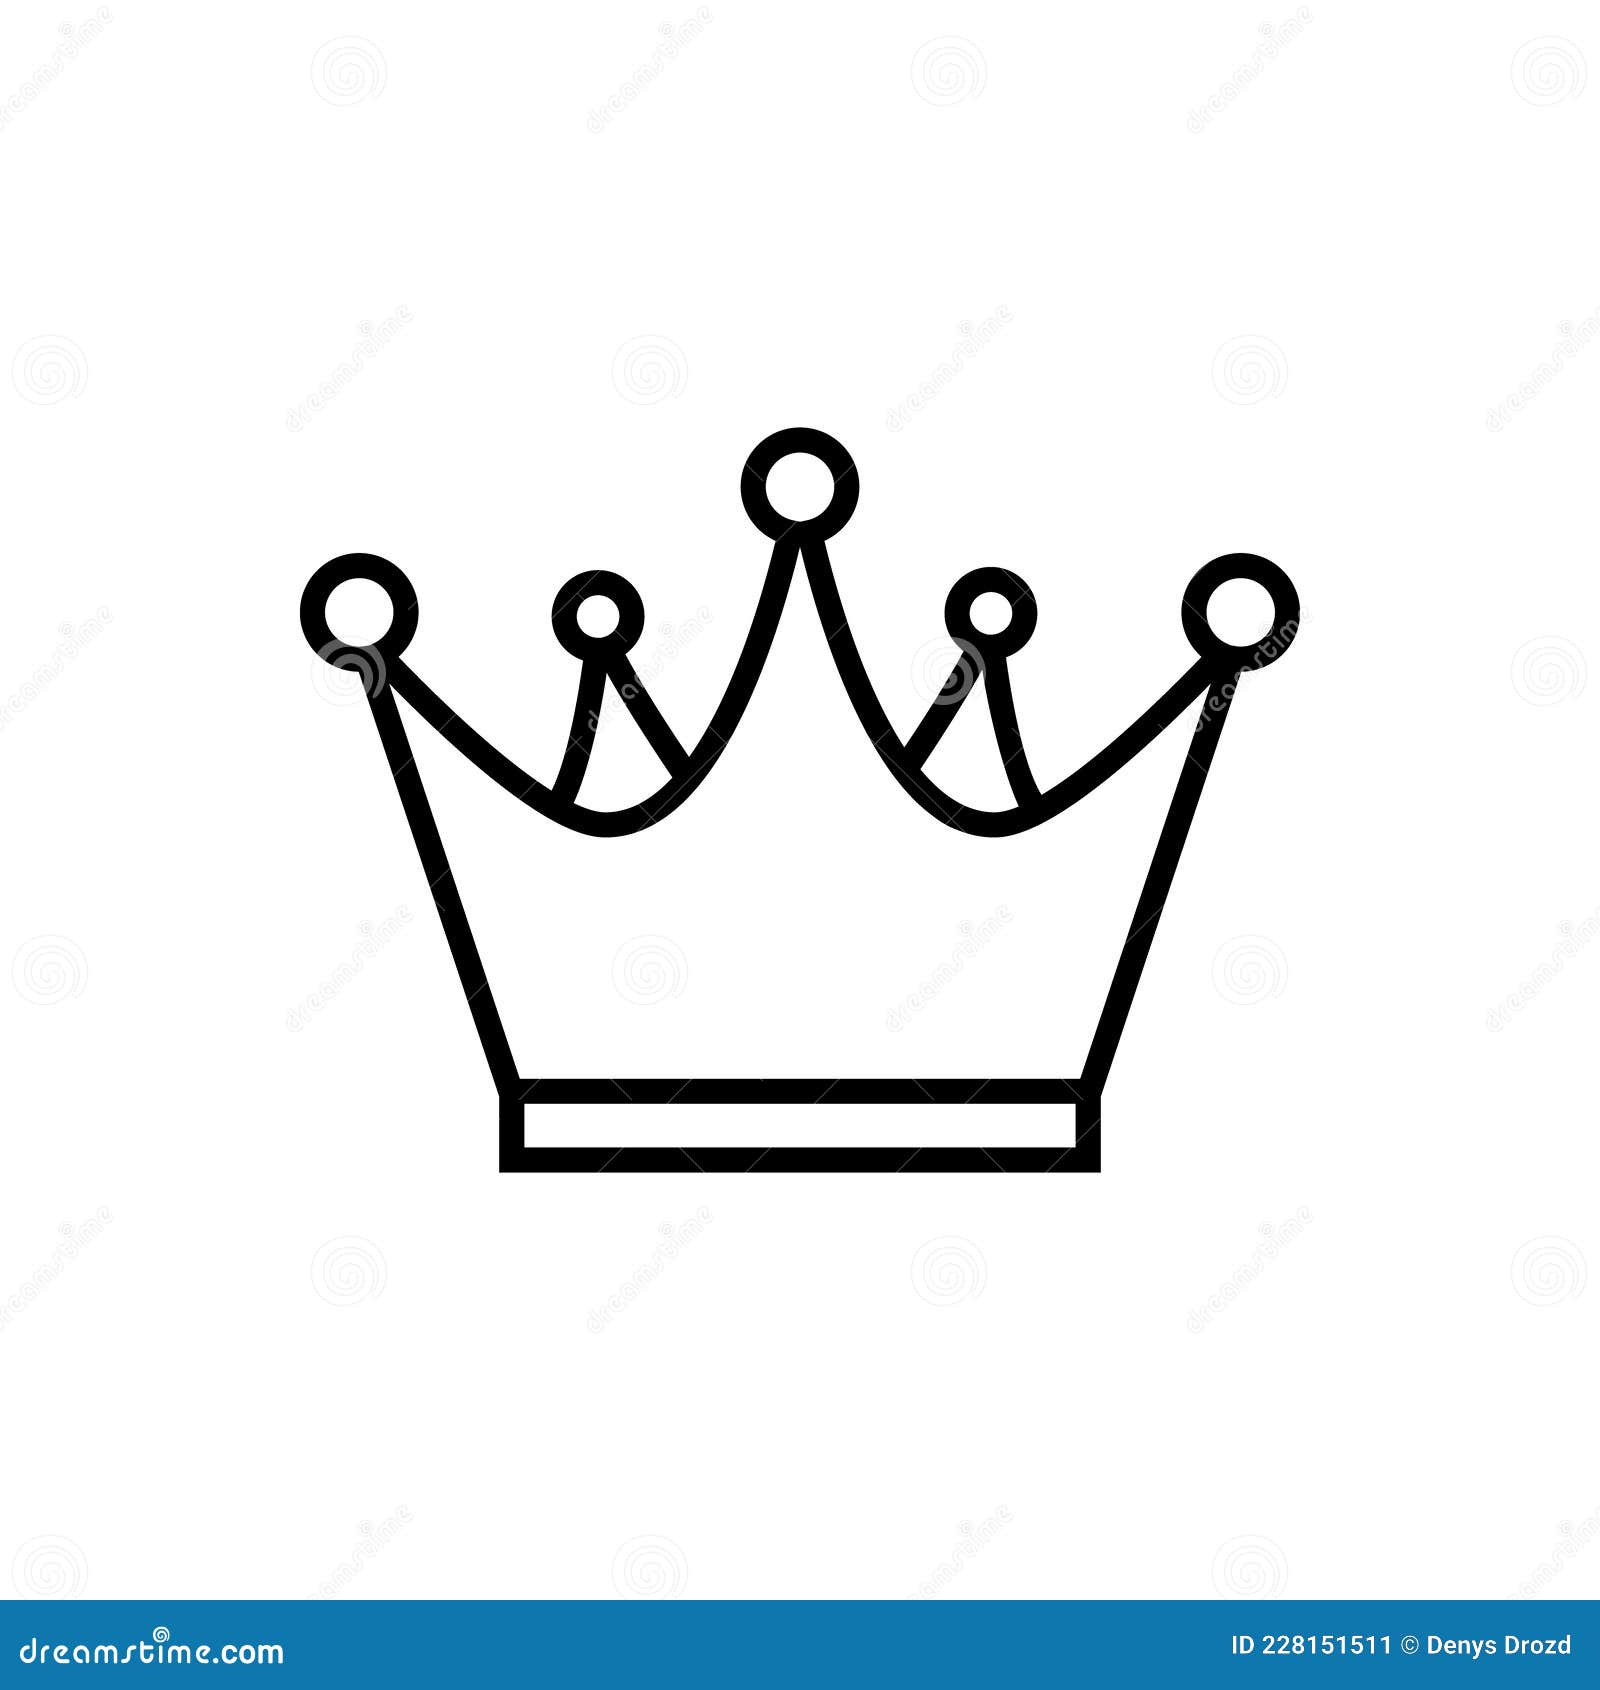 Queen Vector Art, Icons, and Graphics for Free Download